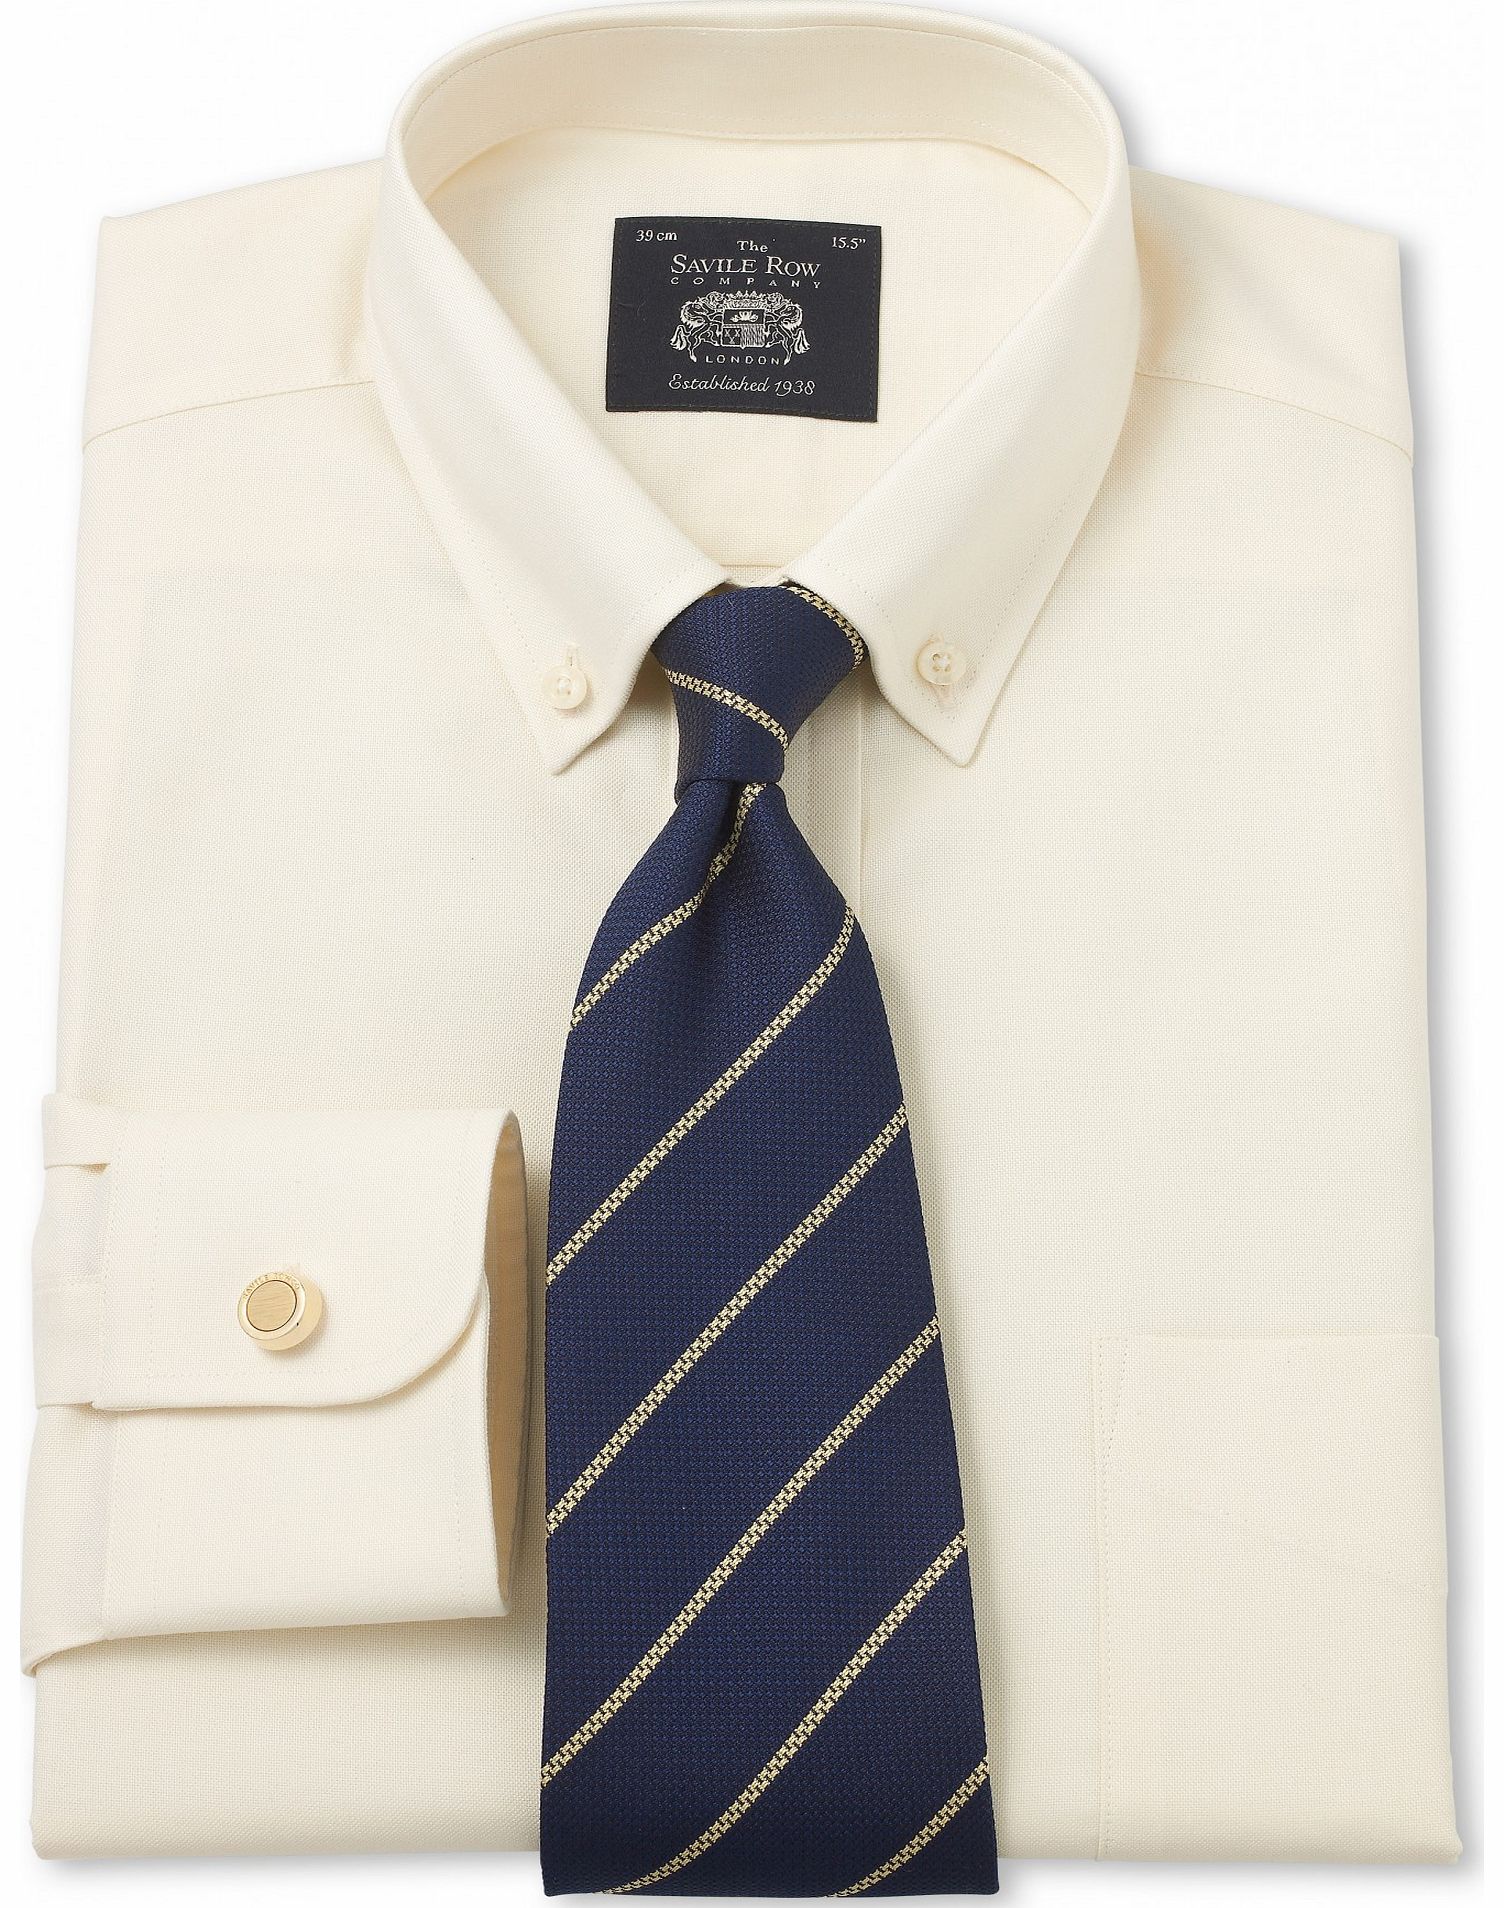 Savile Row Company Cream Pinpoint Classic Fit Shirt 16 1/2``